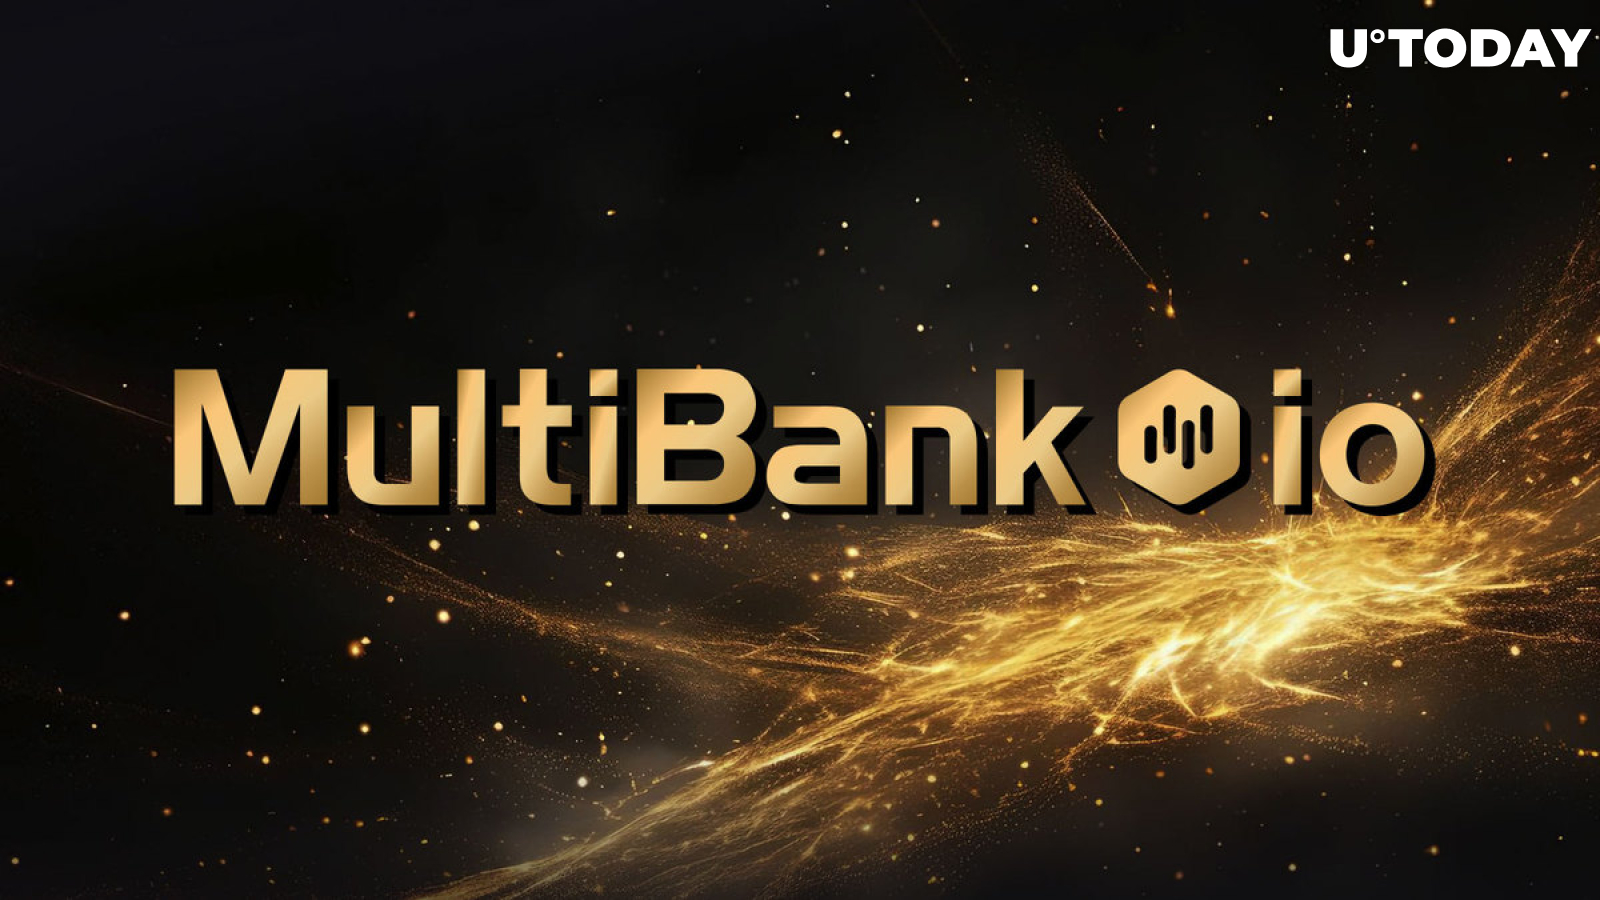 Multibank.io Introduces Mission Center With Rewards for Traders